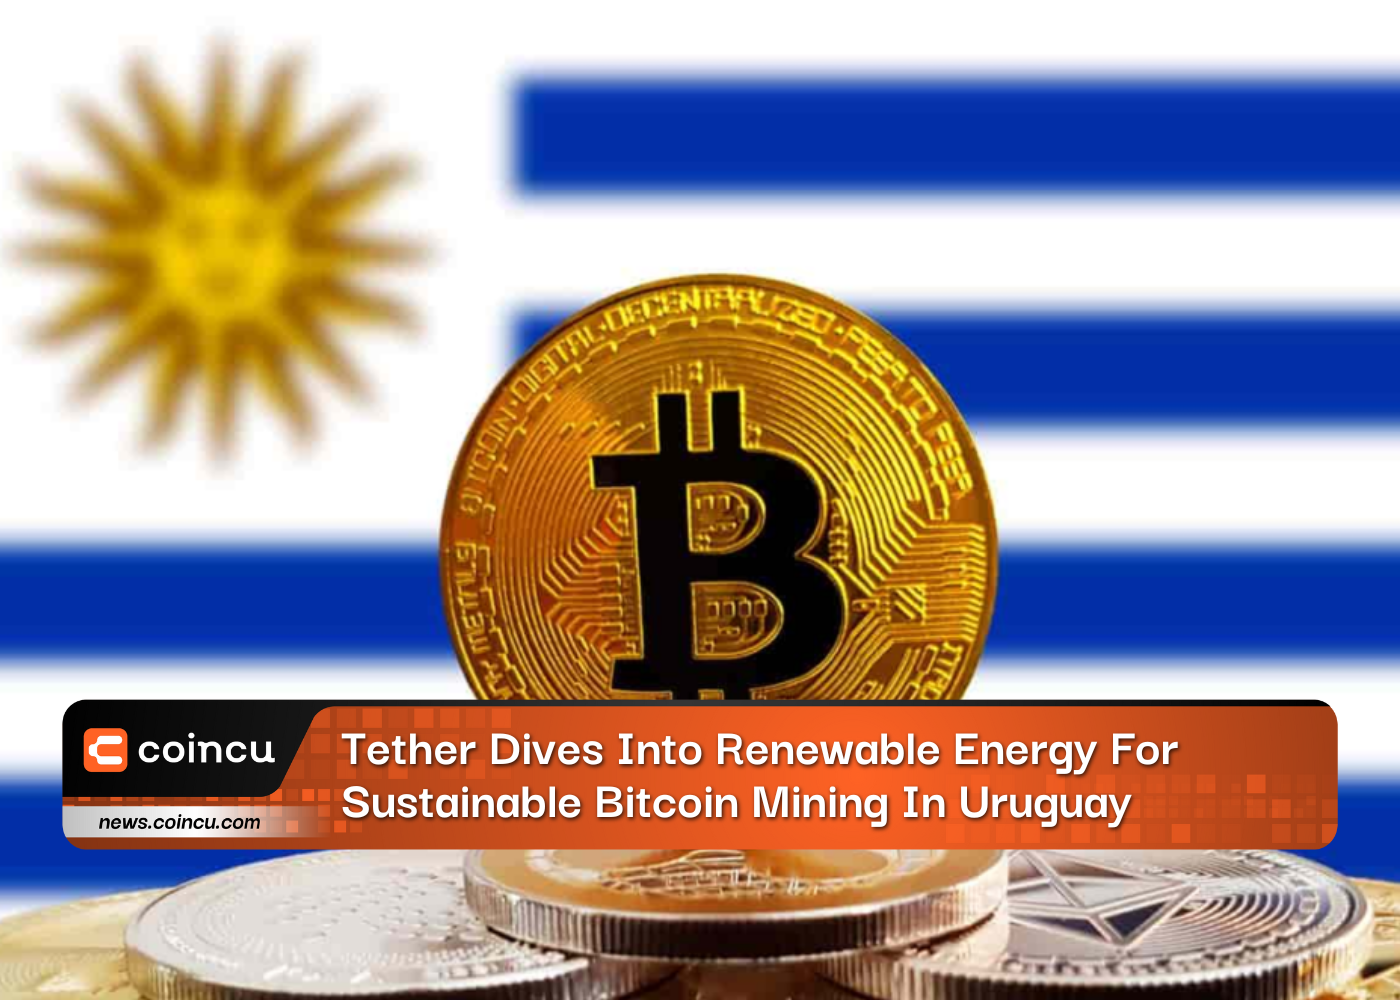 Tether Dives Into Renewable Energy For Sustainable Bitcoin Mining In Uruguay